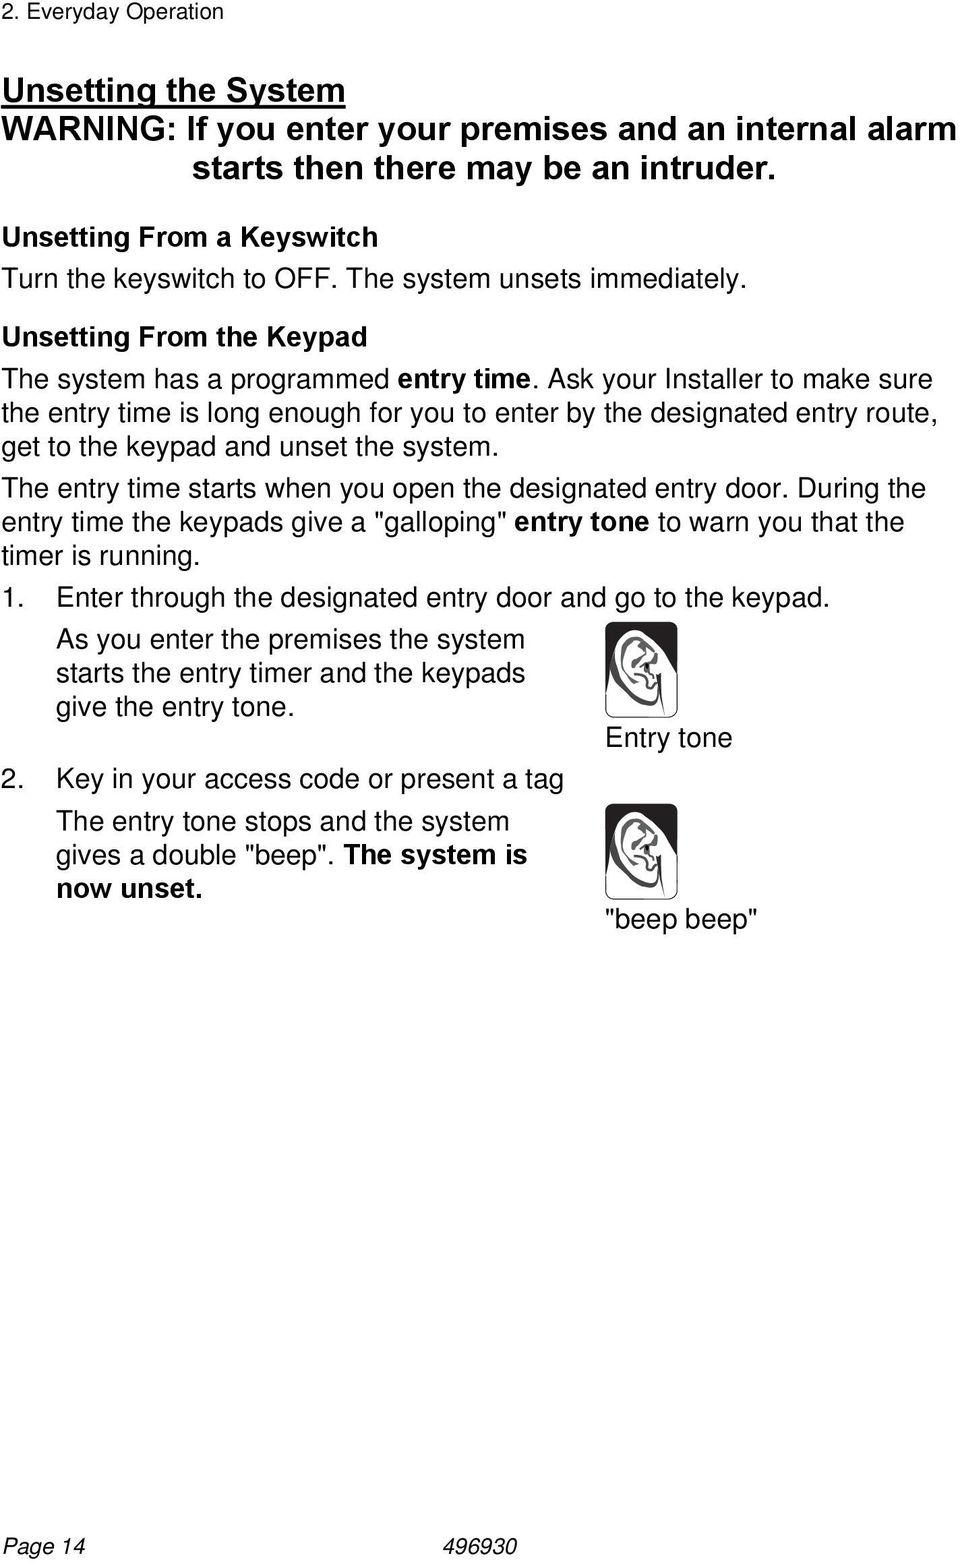 Ask your Installer to make sure the entry time is long enough for you to enter by the designated entry route, get to the keypad and unset the system.